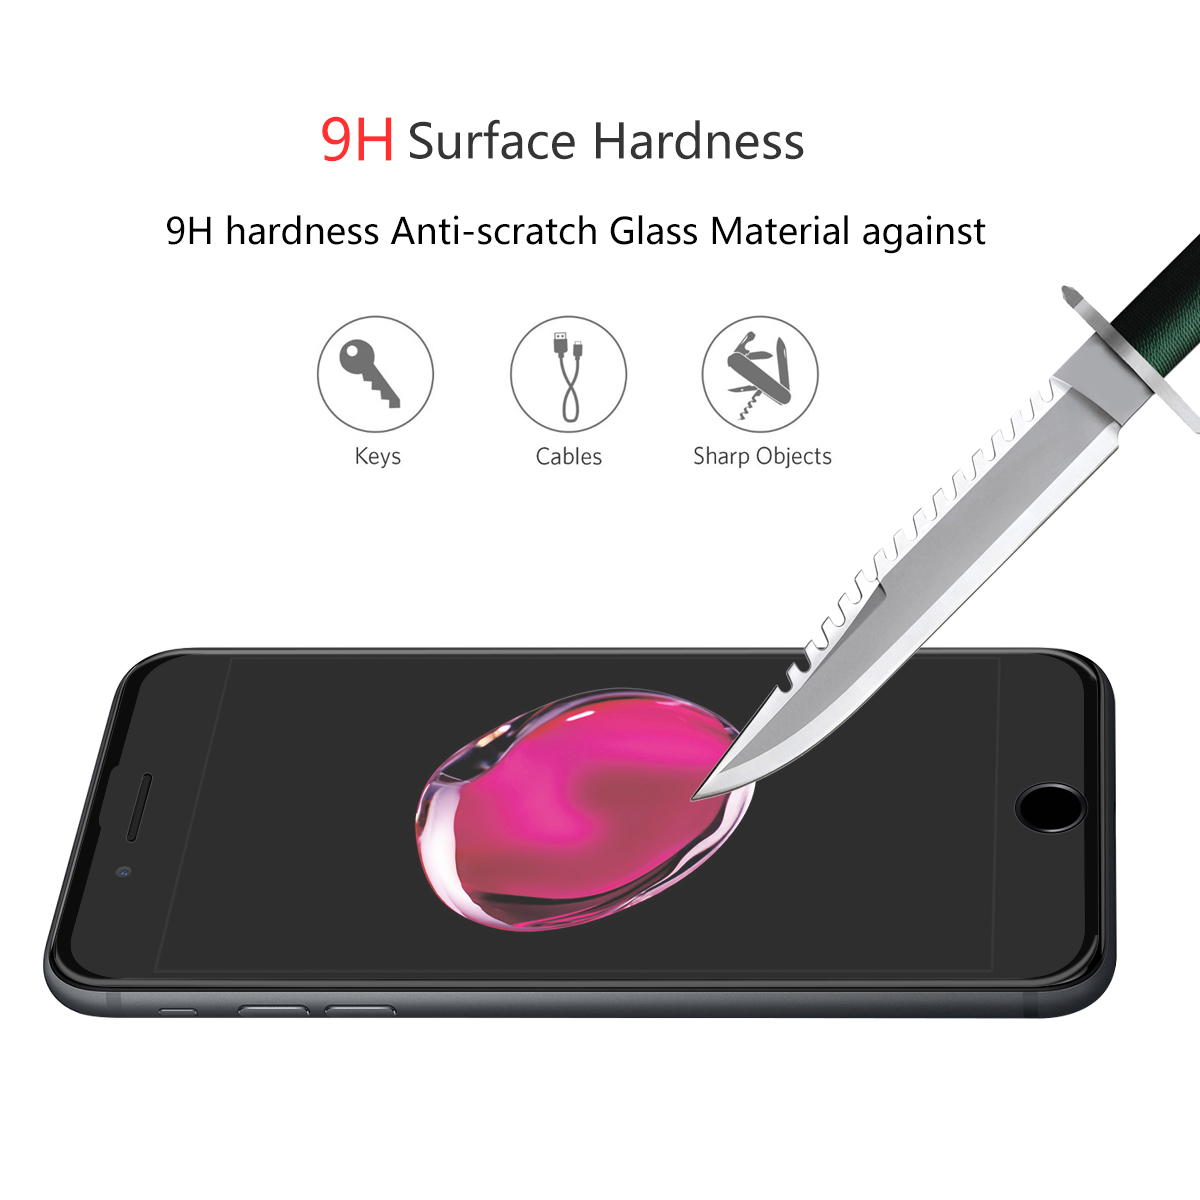 Enkay-02mm-6D-Curved-Edge-Soft-TPU-Tempered-Glass-Screen-Protector-For-iPhone-6-Plus6s-Plus-1335393